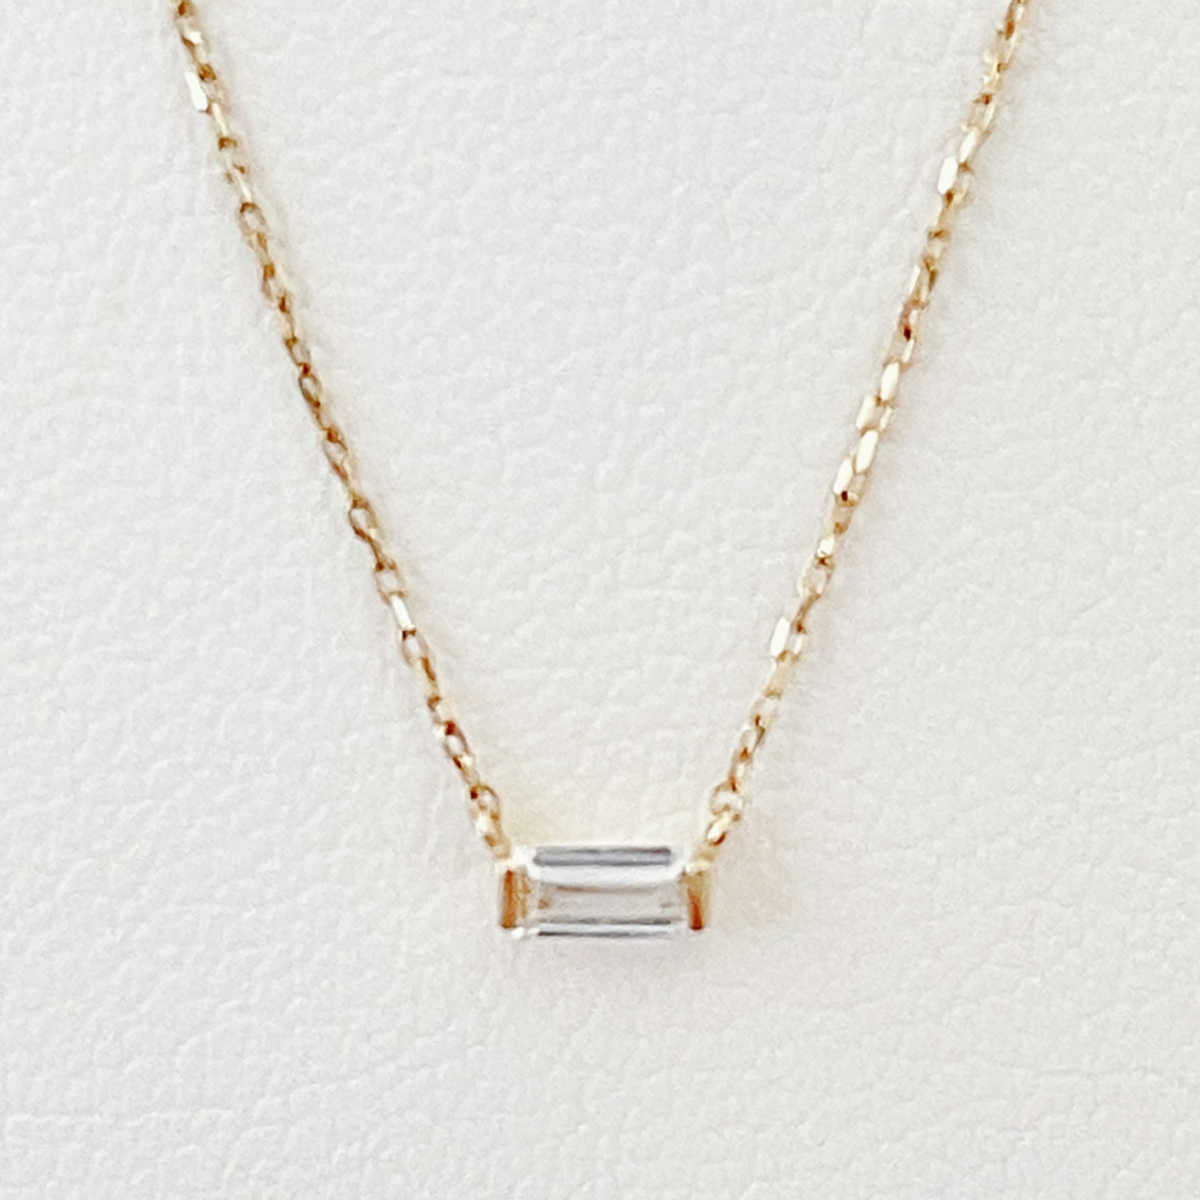 Baguette Chain Gold Choker Necklace | Dainty Gold Necklace | 14k Gold Layered Necklaces from Two of Most